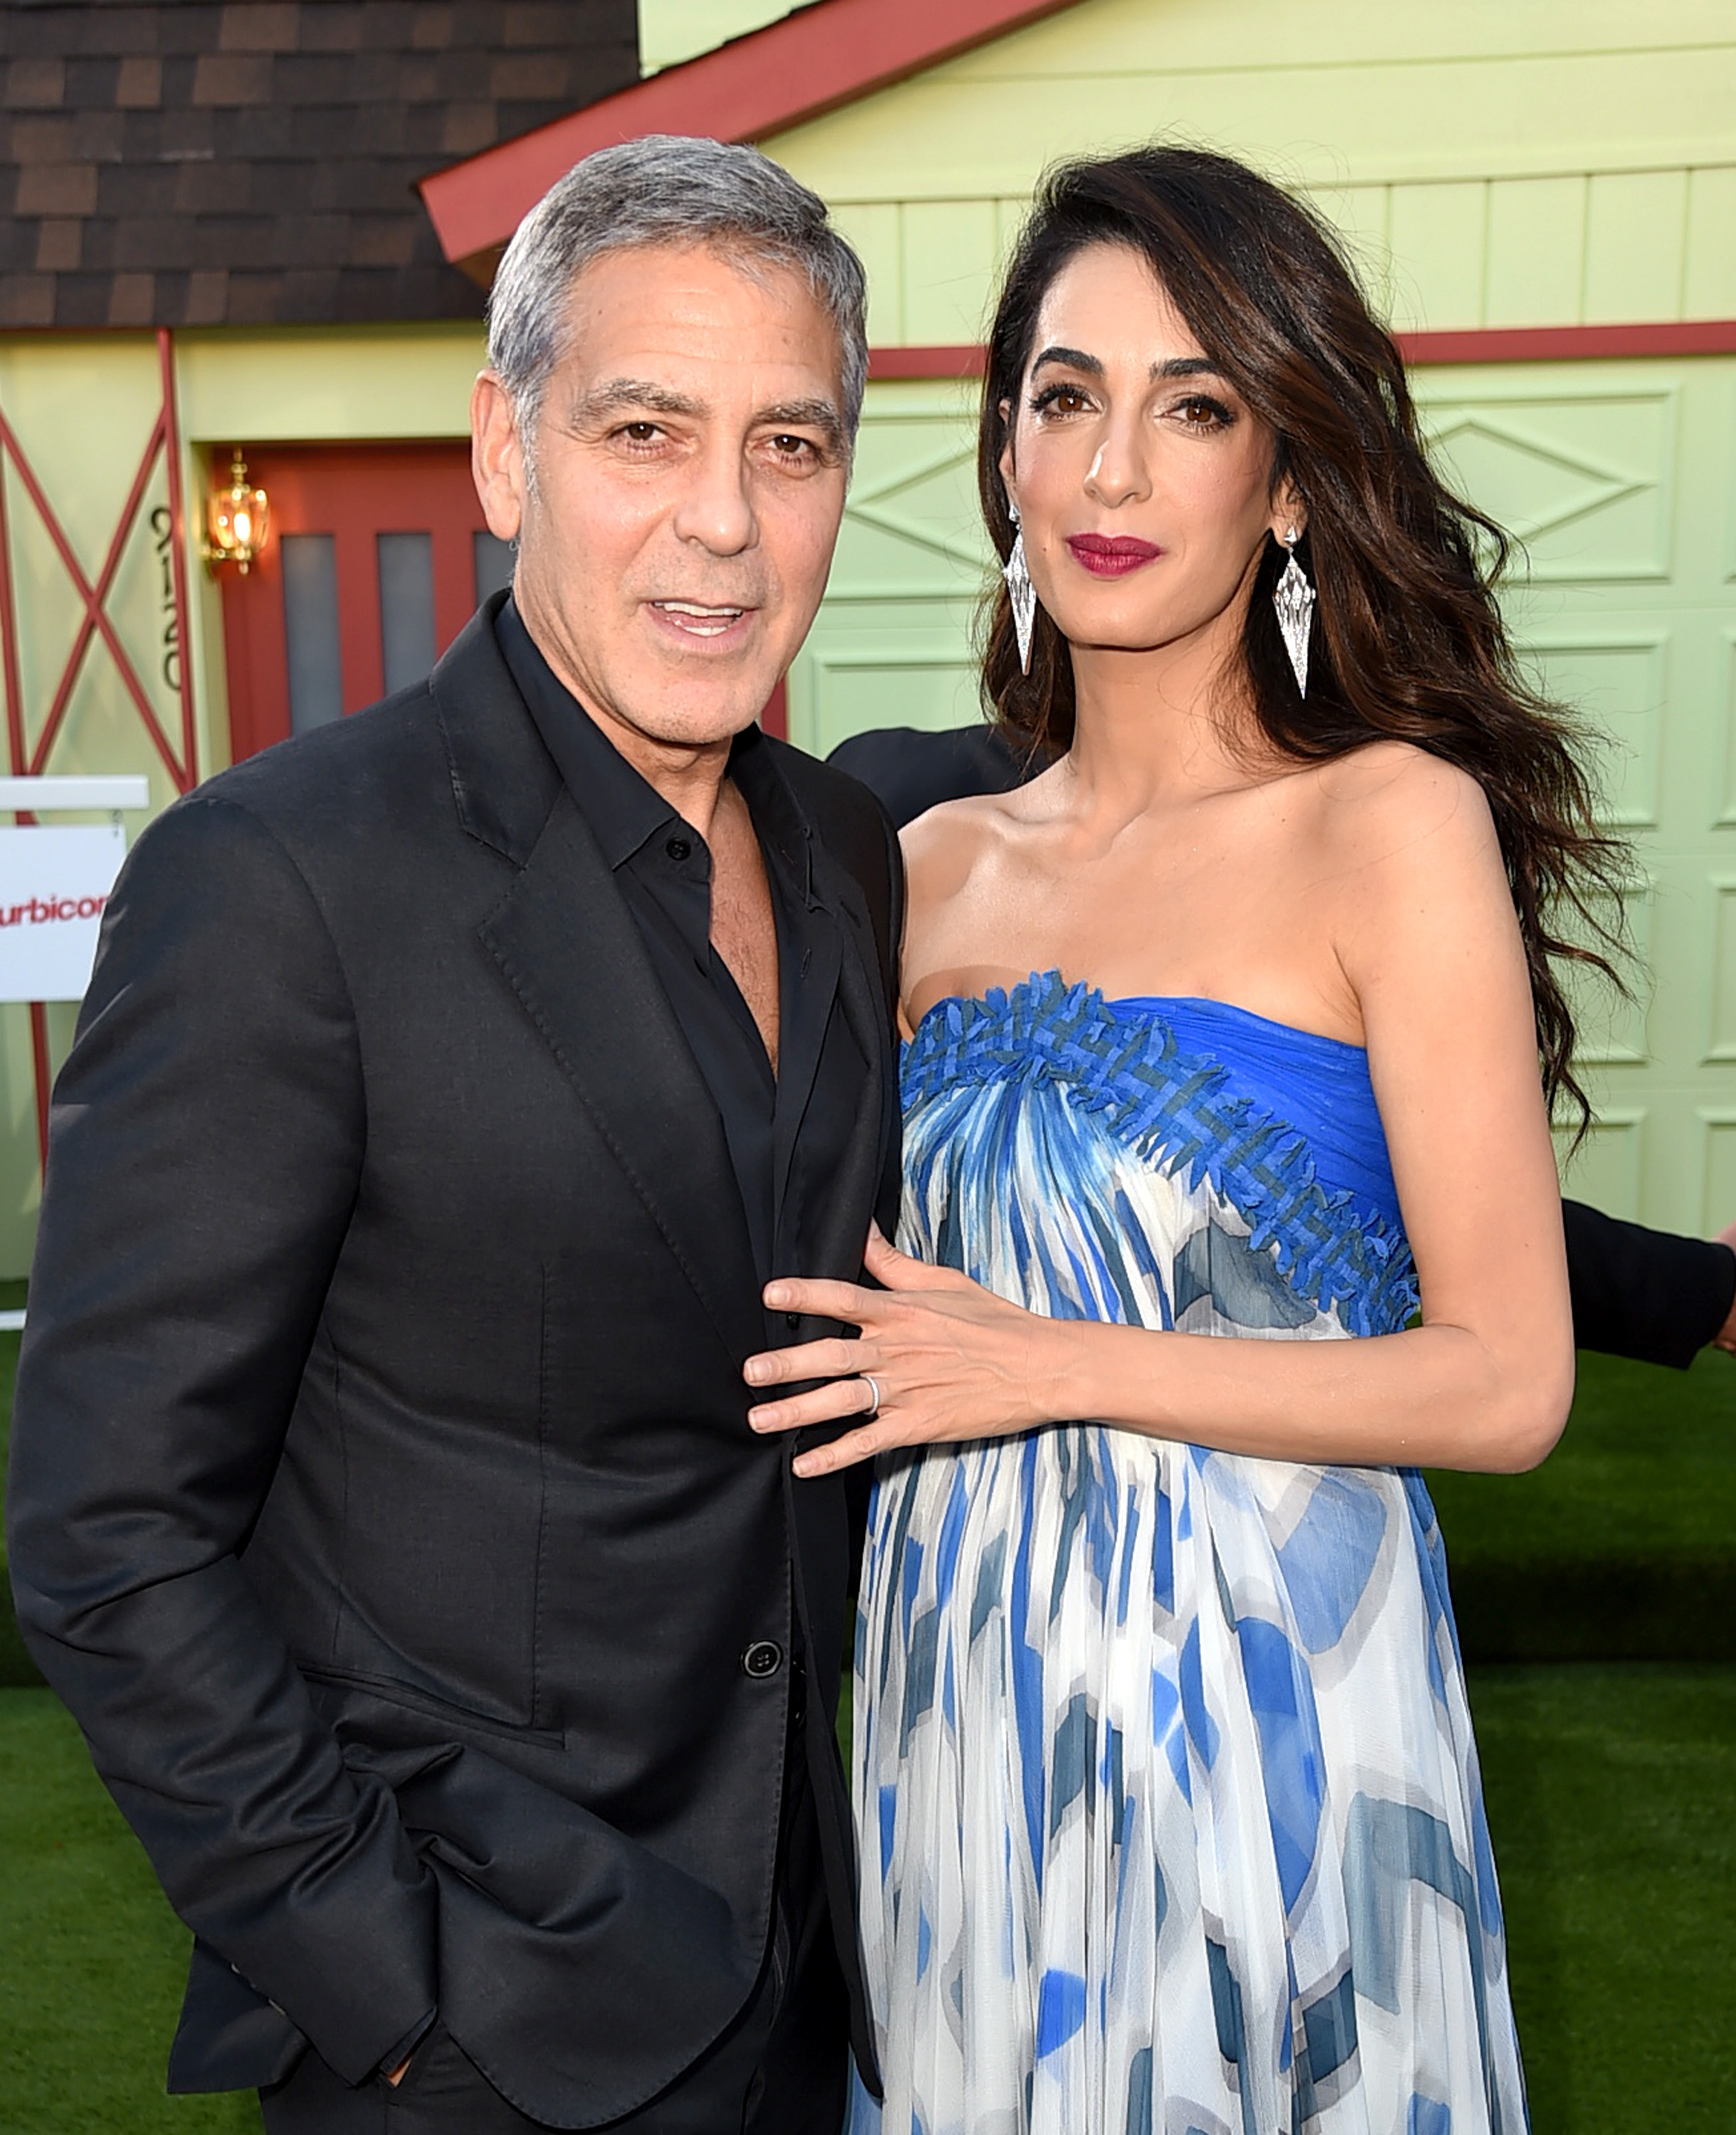 George Clooney and Amal Clooney in Los Angeles, California on October 22, 2017 | Source: Getty Images